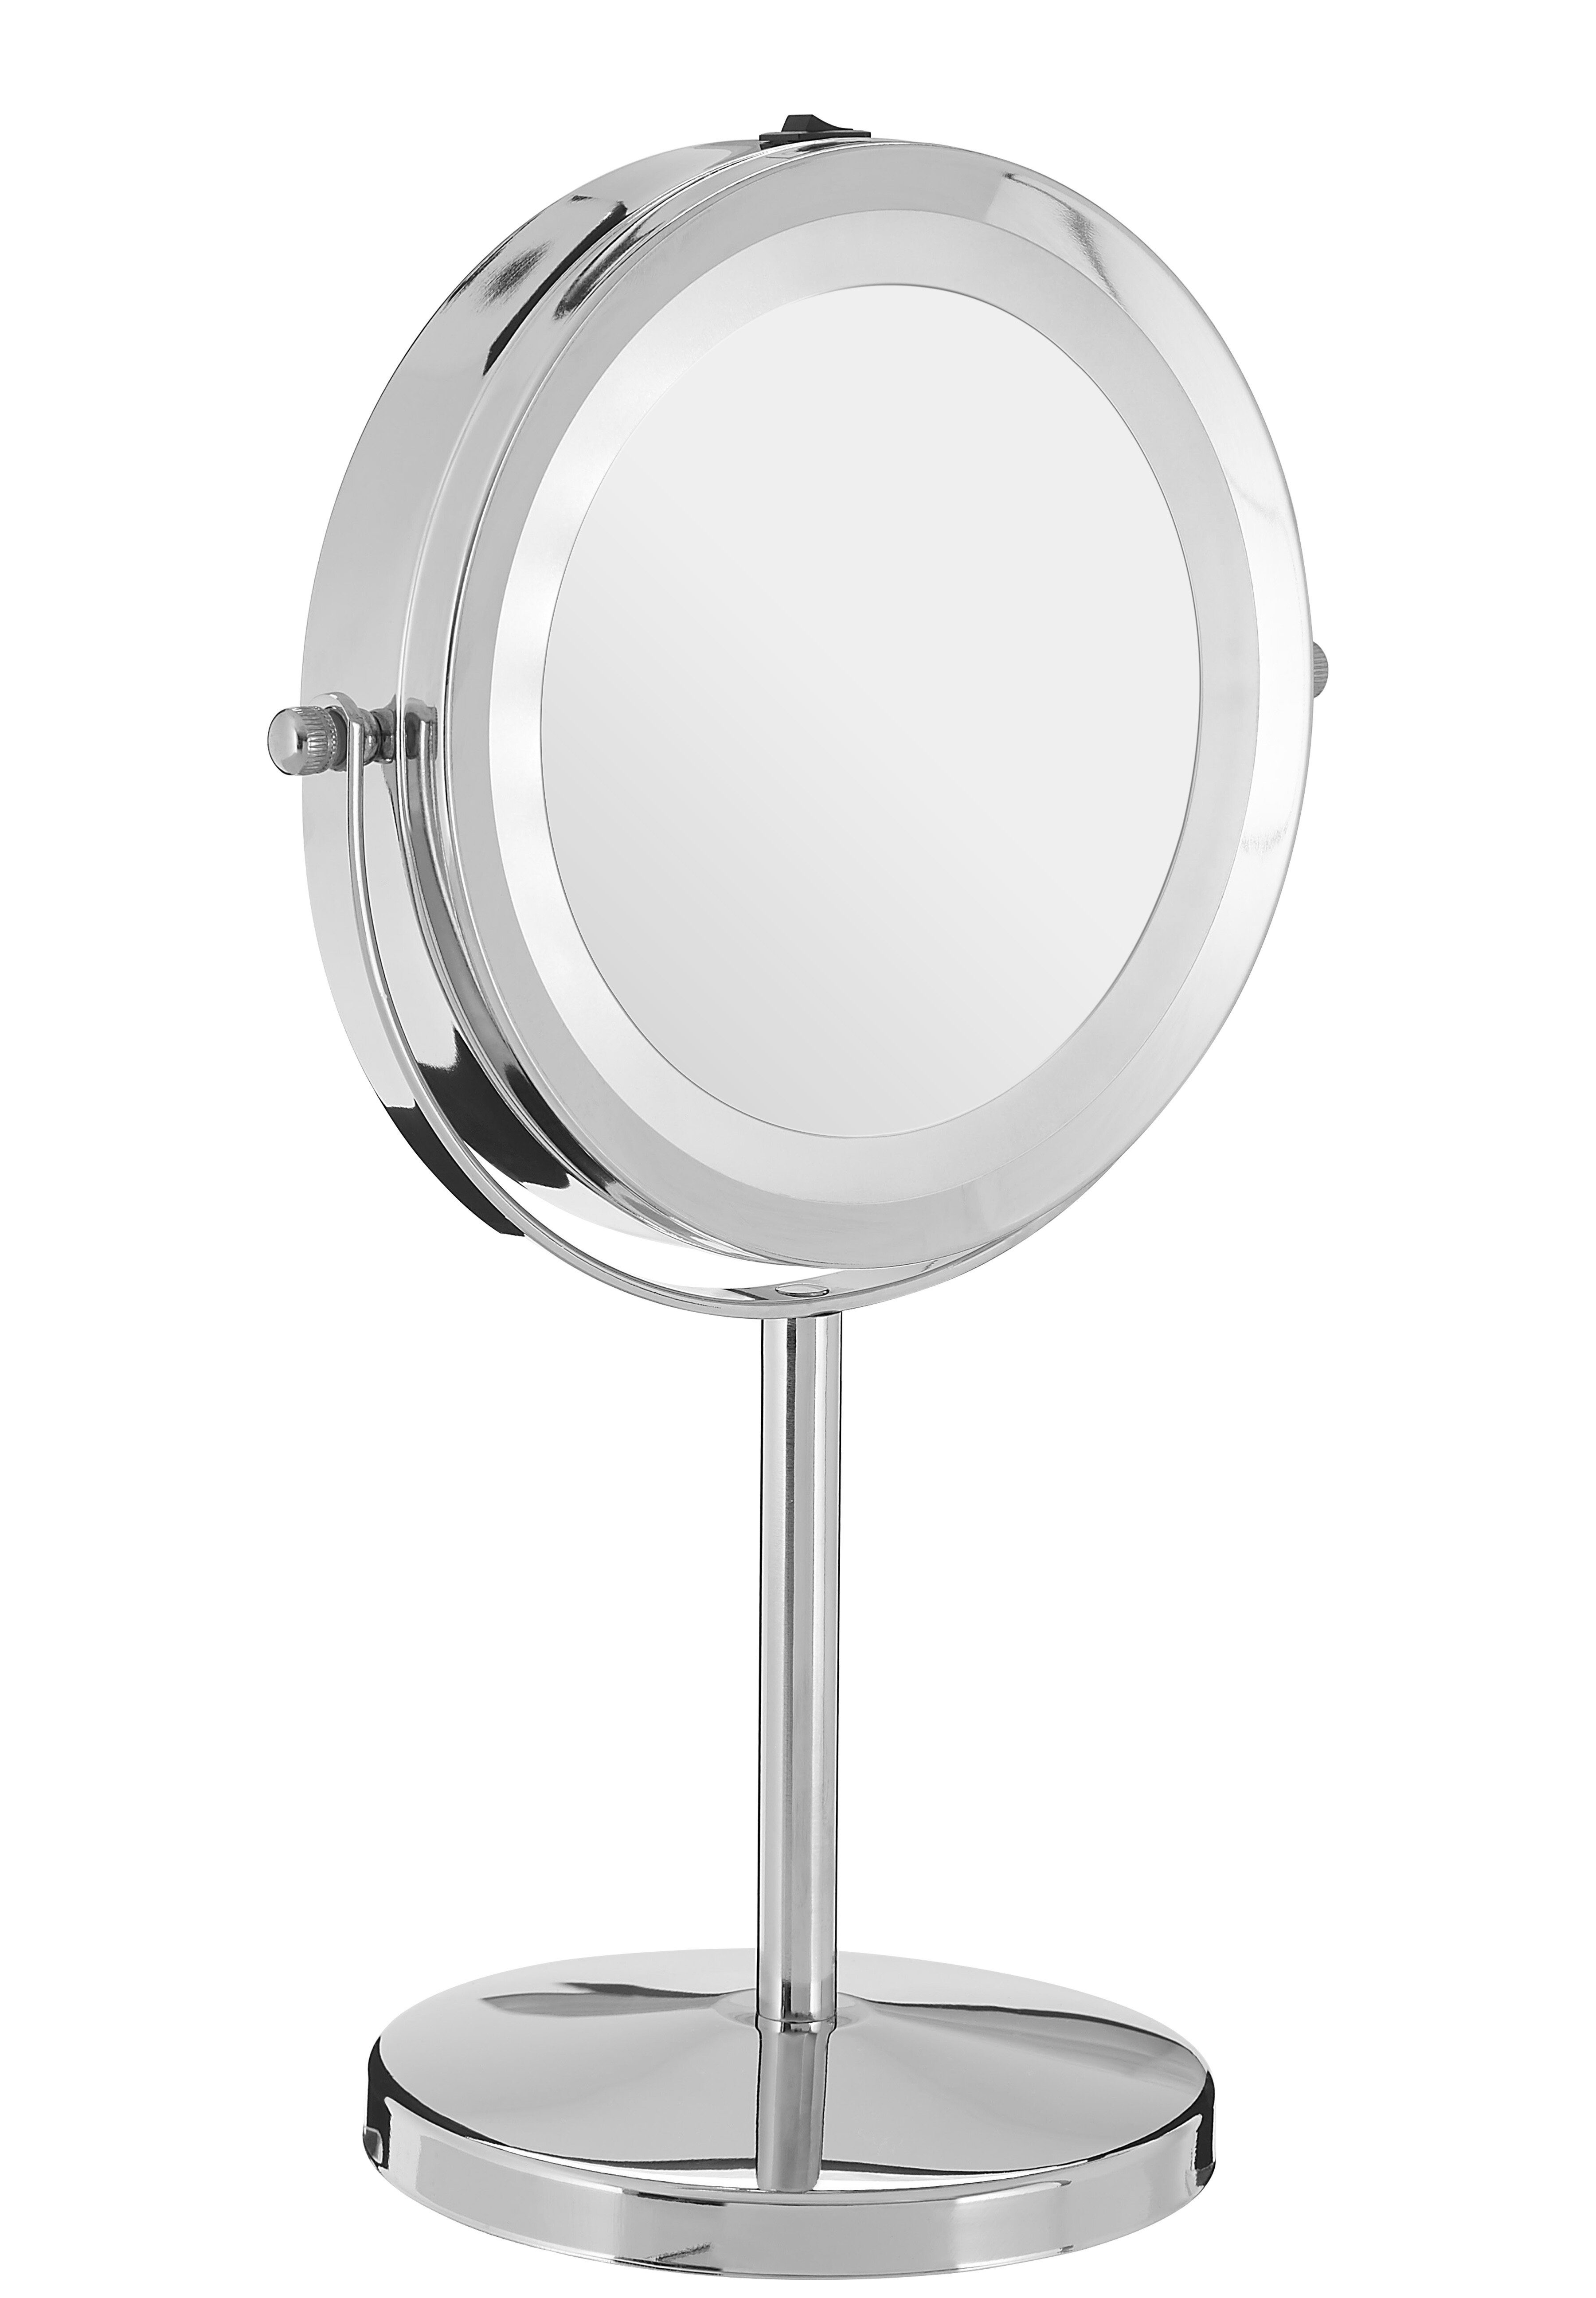 Aesfee Double-Sided 1x 7x Magnification LED Makeup Mirror with Lights, Ligh - 2